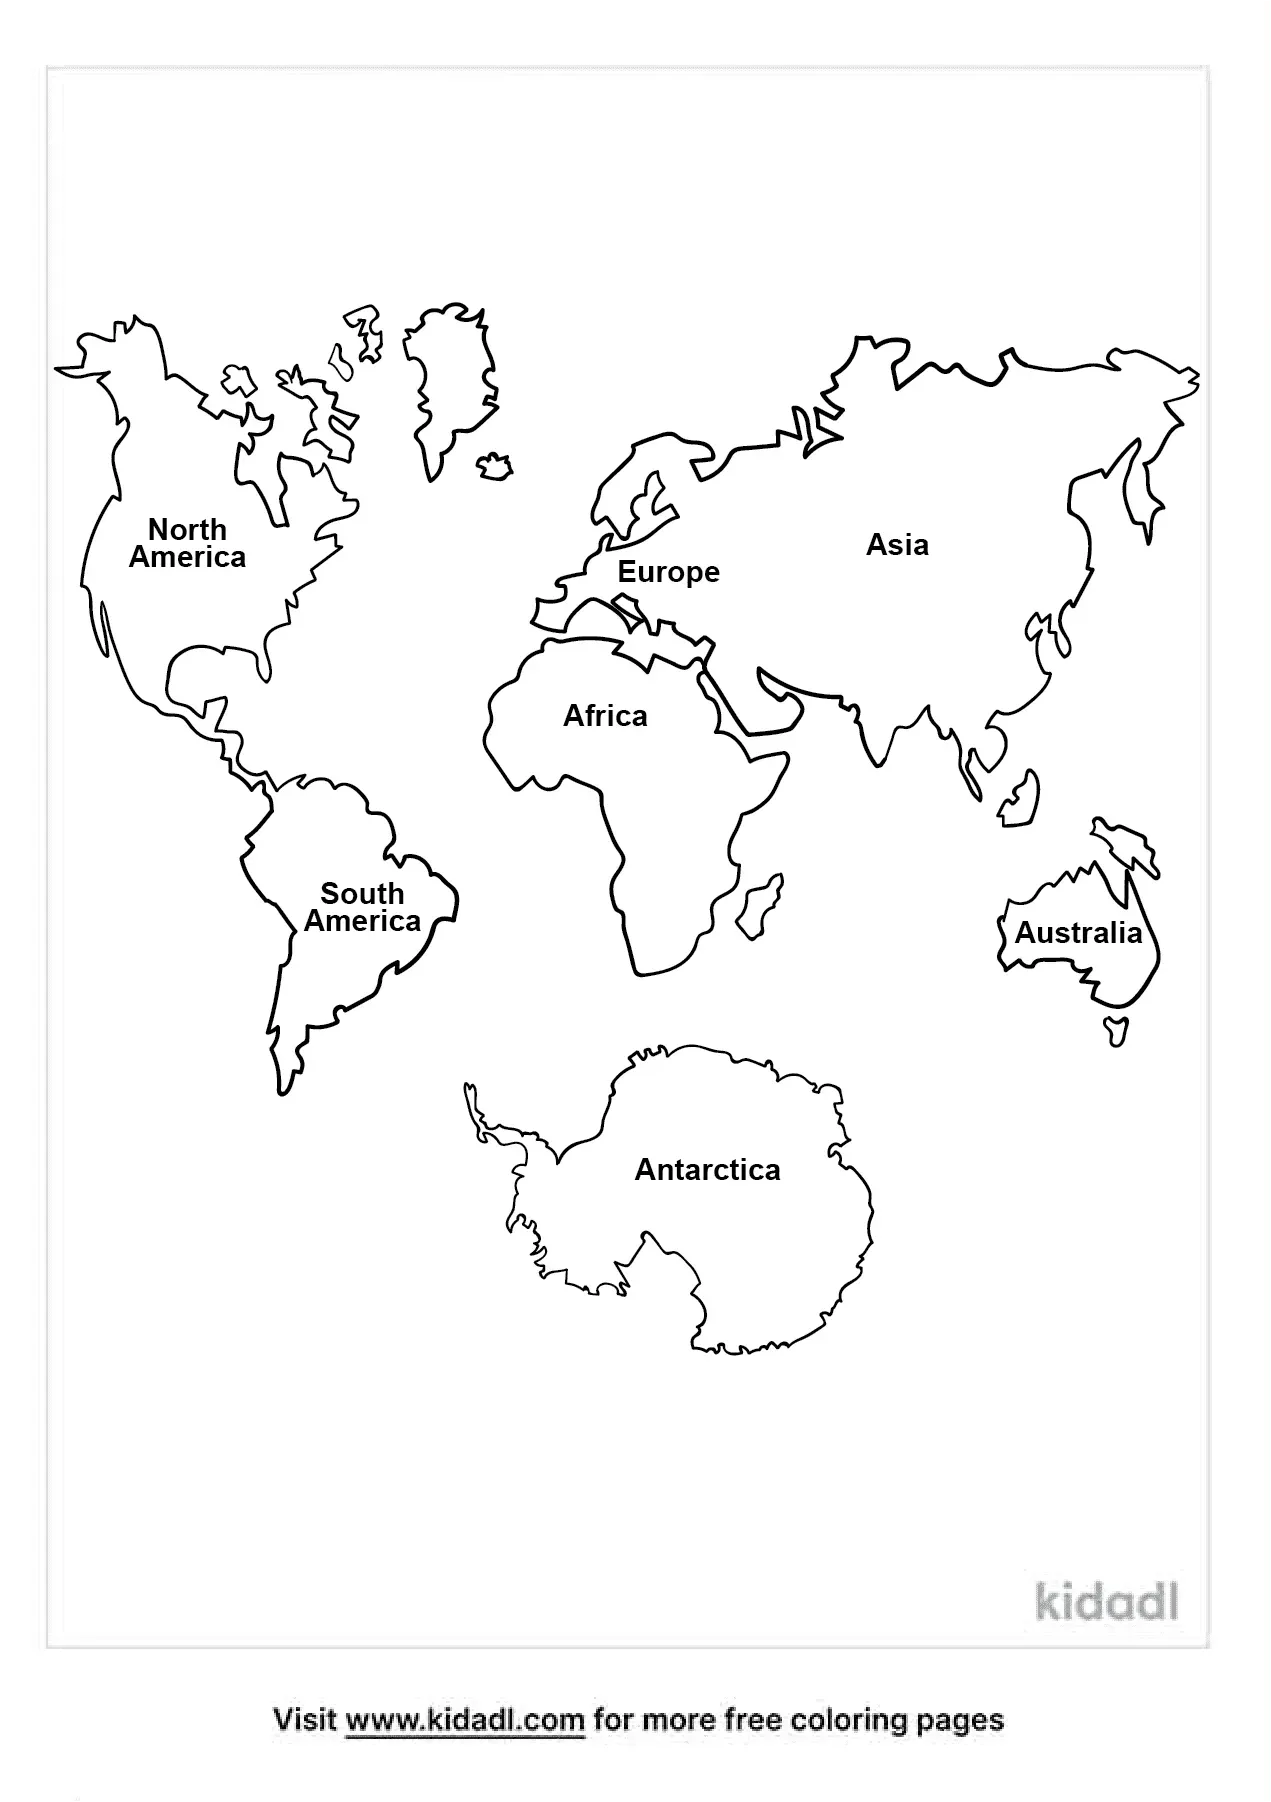 7 Continents Coloring Pages | Free Countries-cultures Coloring Pages ...